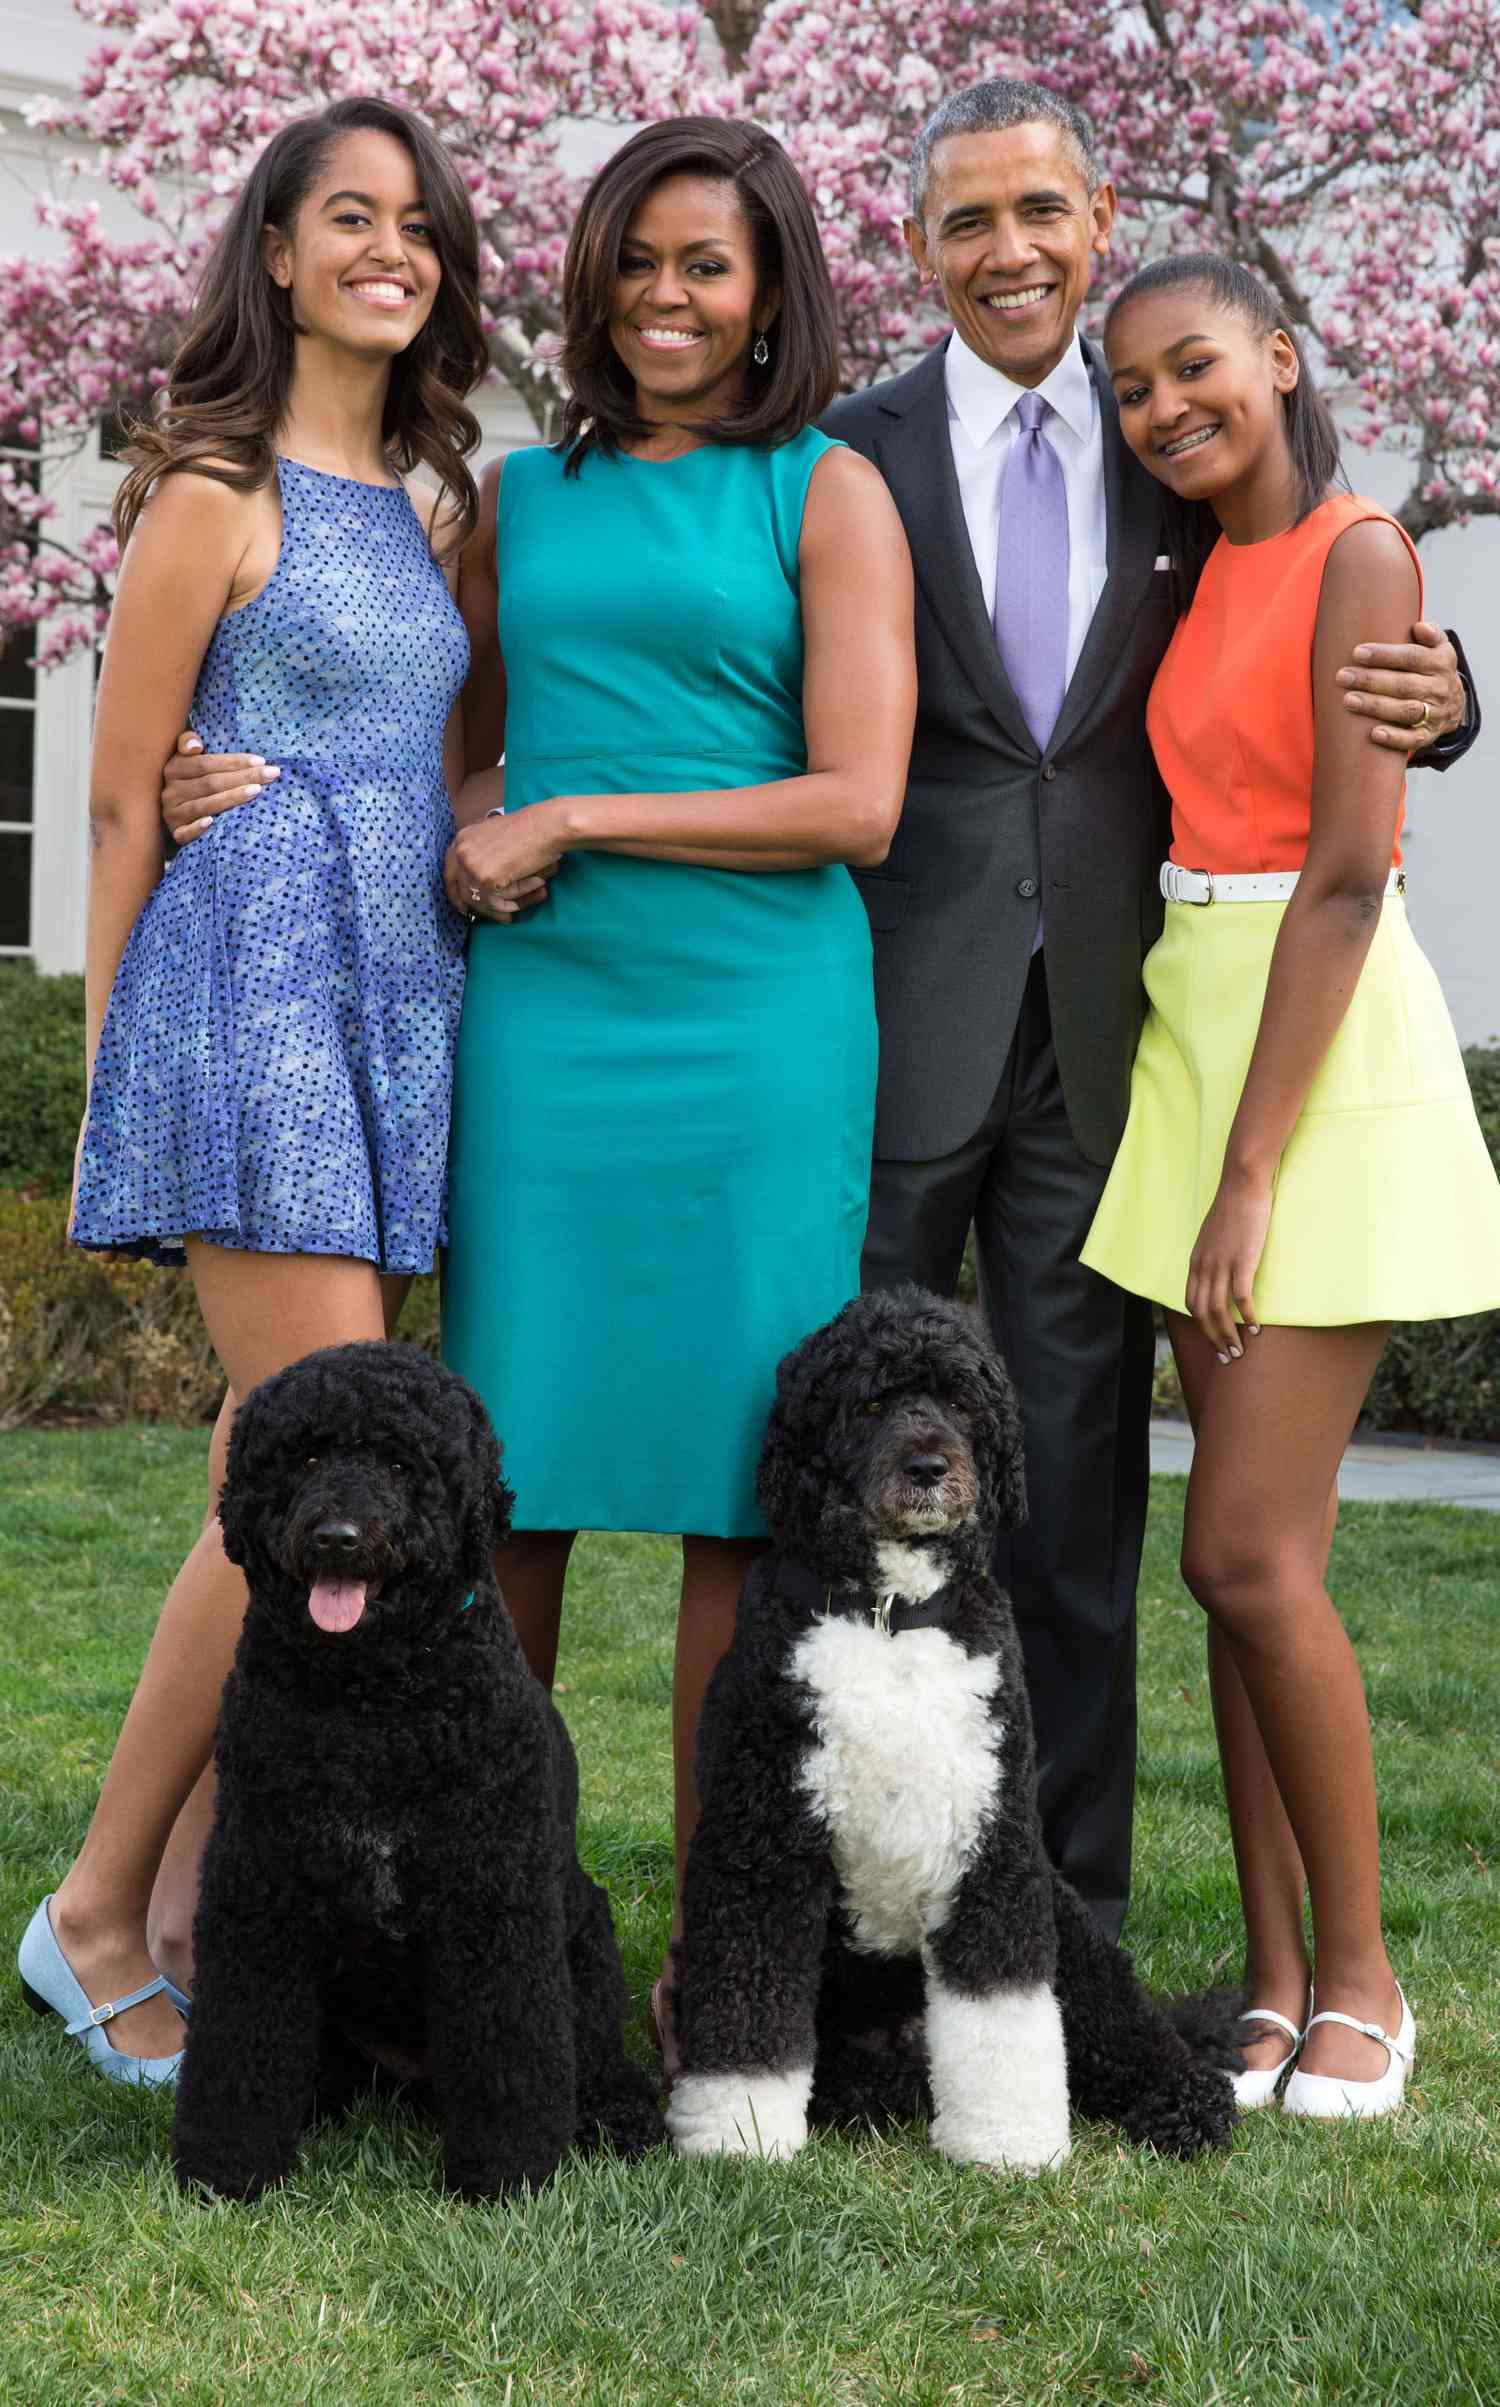 WASHINGTON, DC - APRIL 05: U.S. President Barack Obama, First Lady Michelle Obama, and daughters Malia (L) and Sasha (R) pose for a family portrait with their pets Bo and Sunny in the Rose Garden of the White House on Easter Sunday, April 5, 2015 in Washington, DC. (Photo by Pete Souza/The White House via Getty Images)